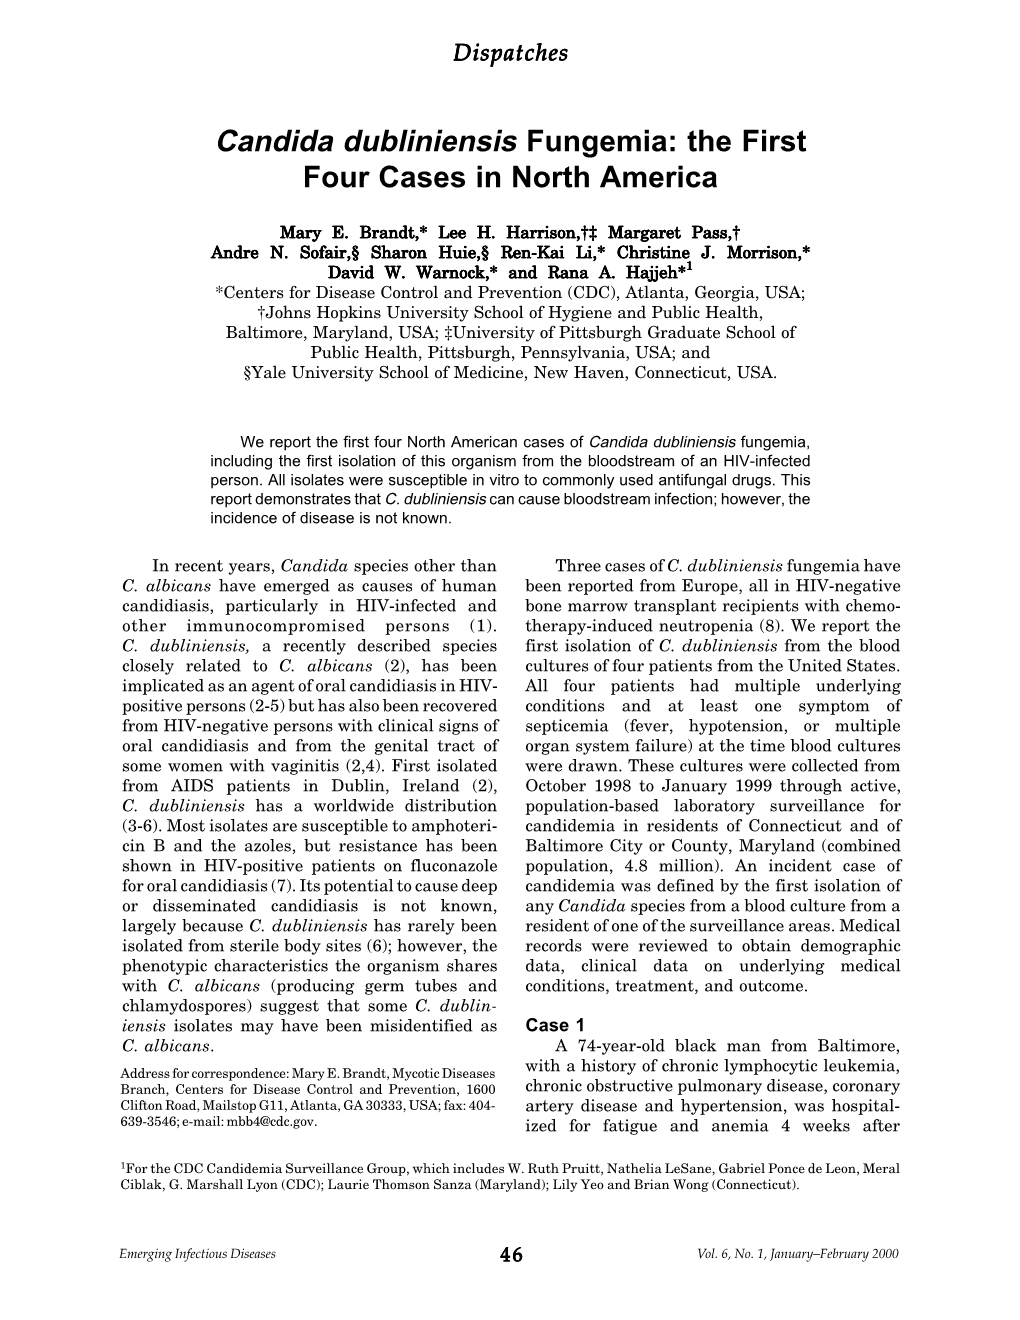 Candida Dubliniensis Fungemia: the First Four Cases in North America